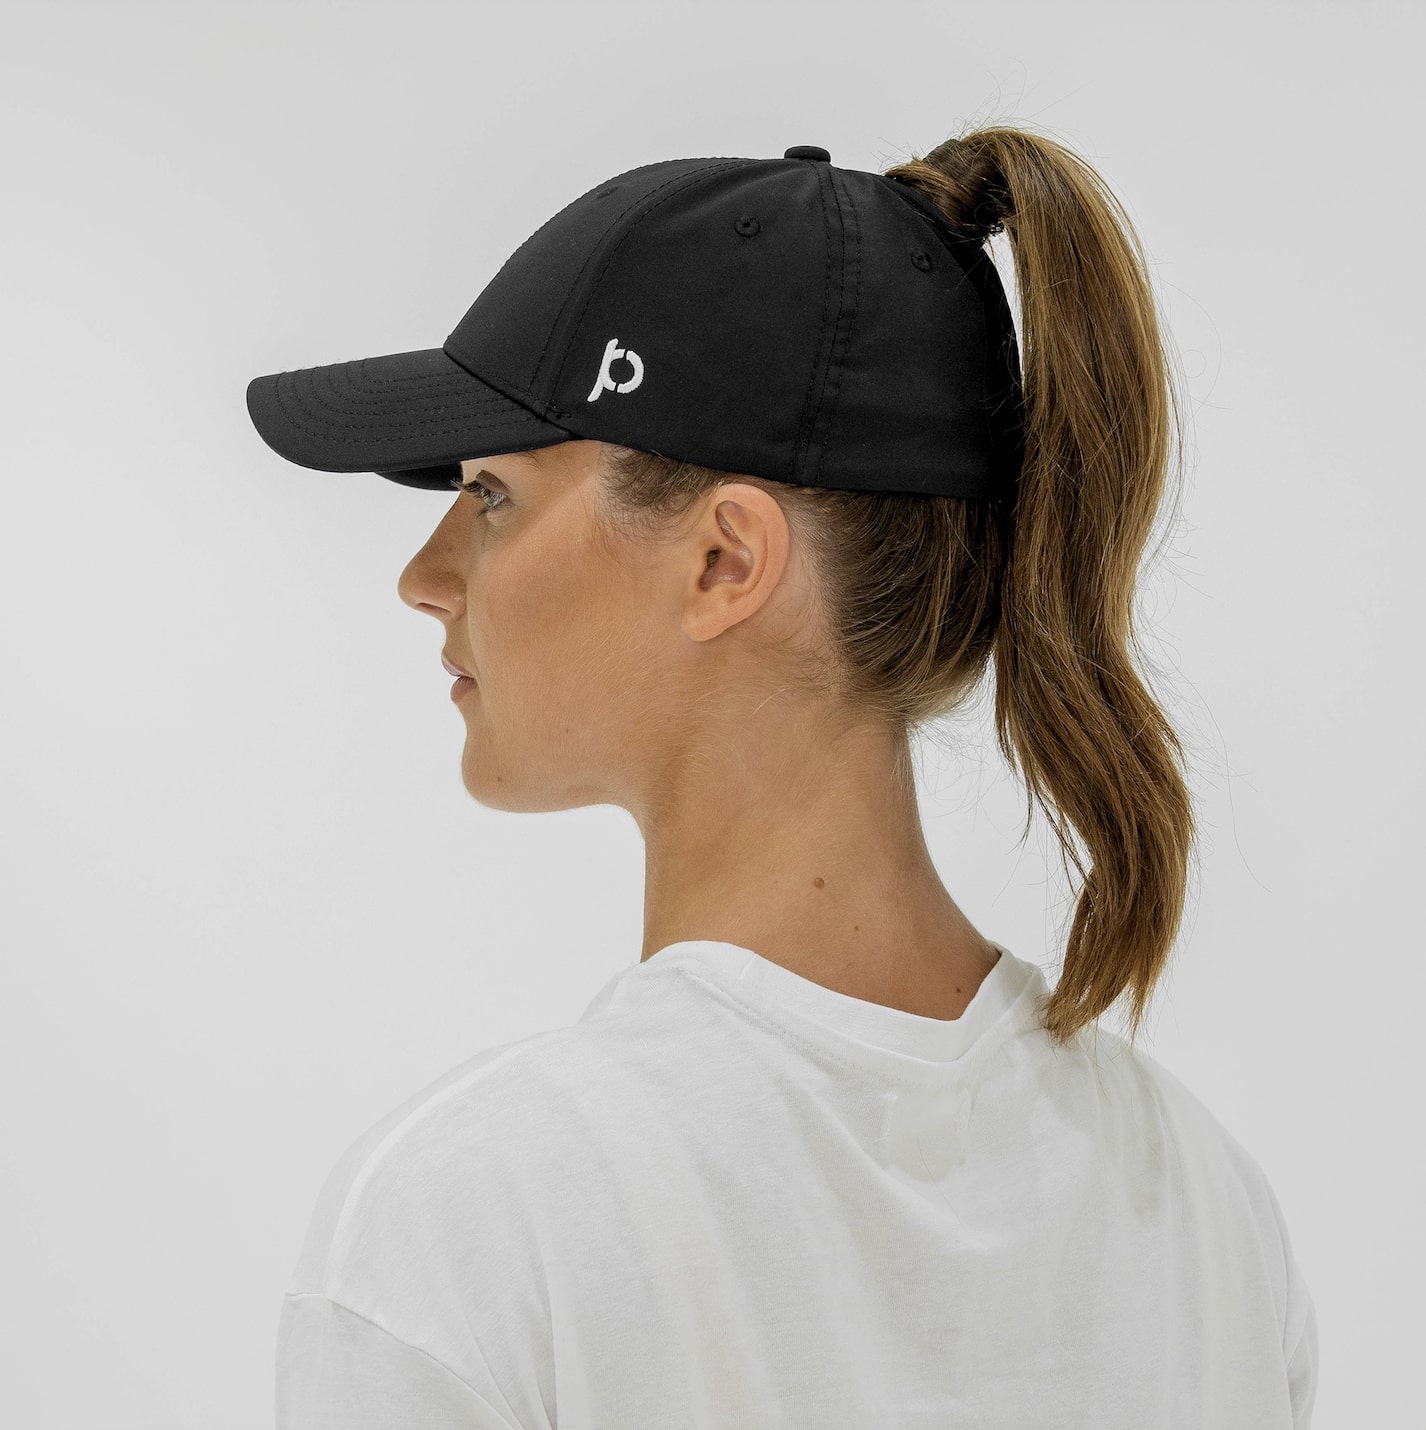 Ponyback Hat Collection from Ponyback